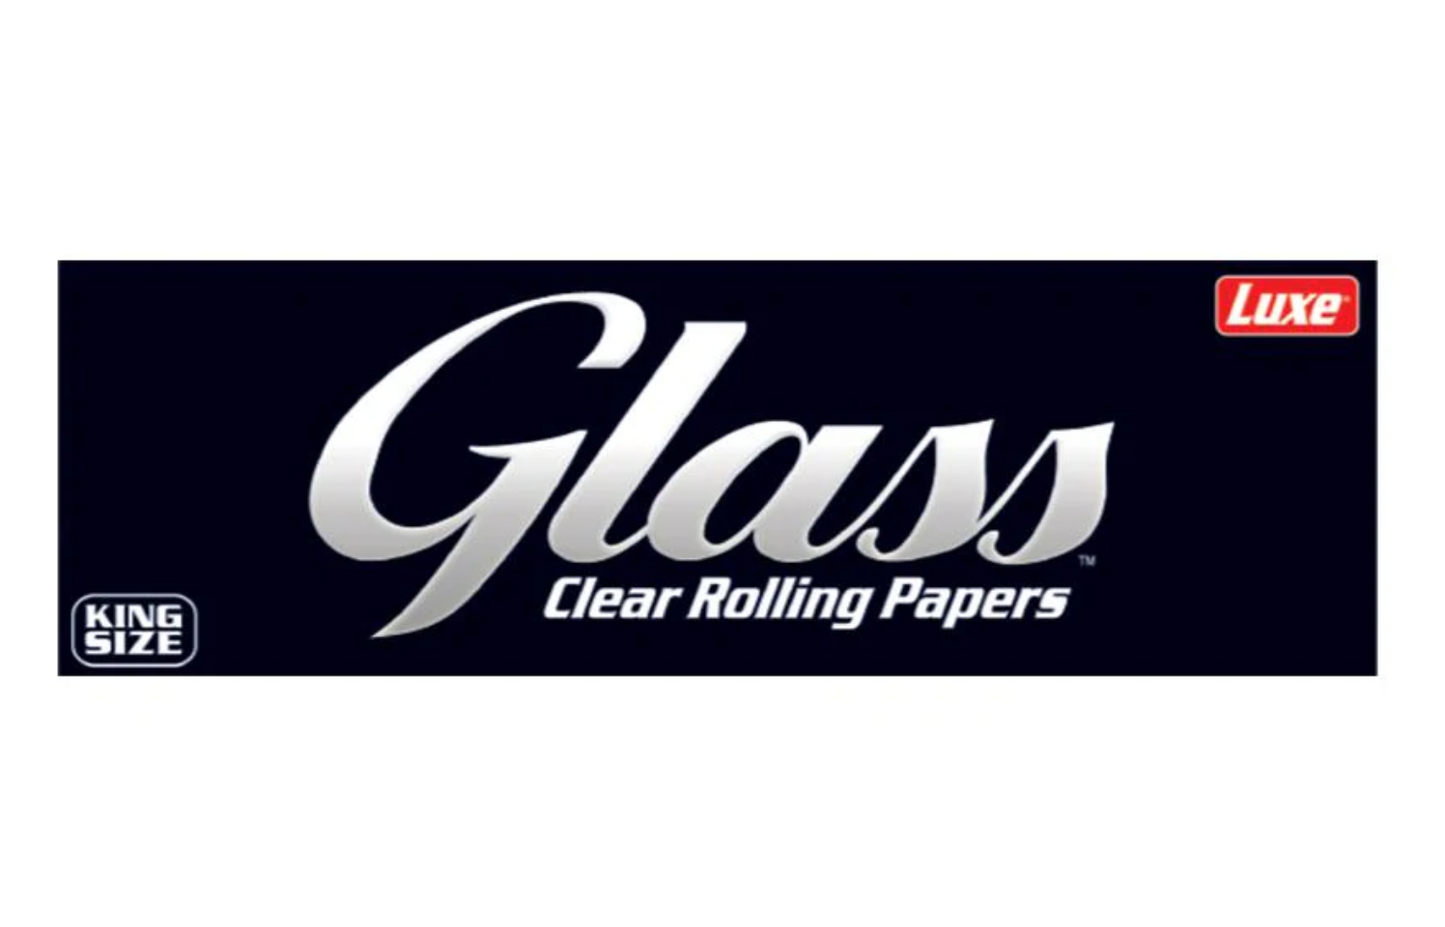 LUXE Glass Clear Rolling Papers